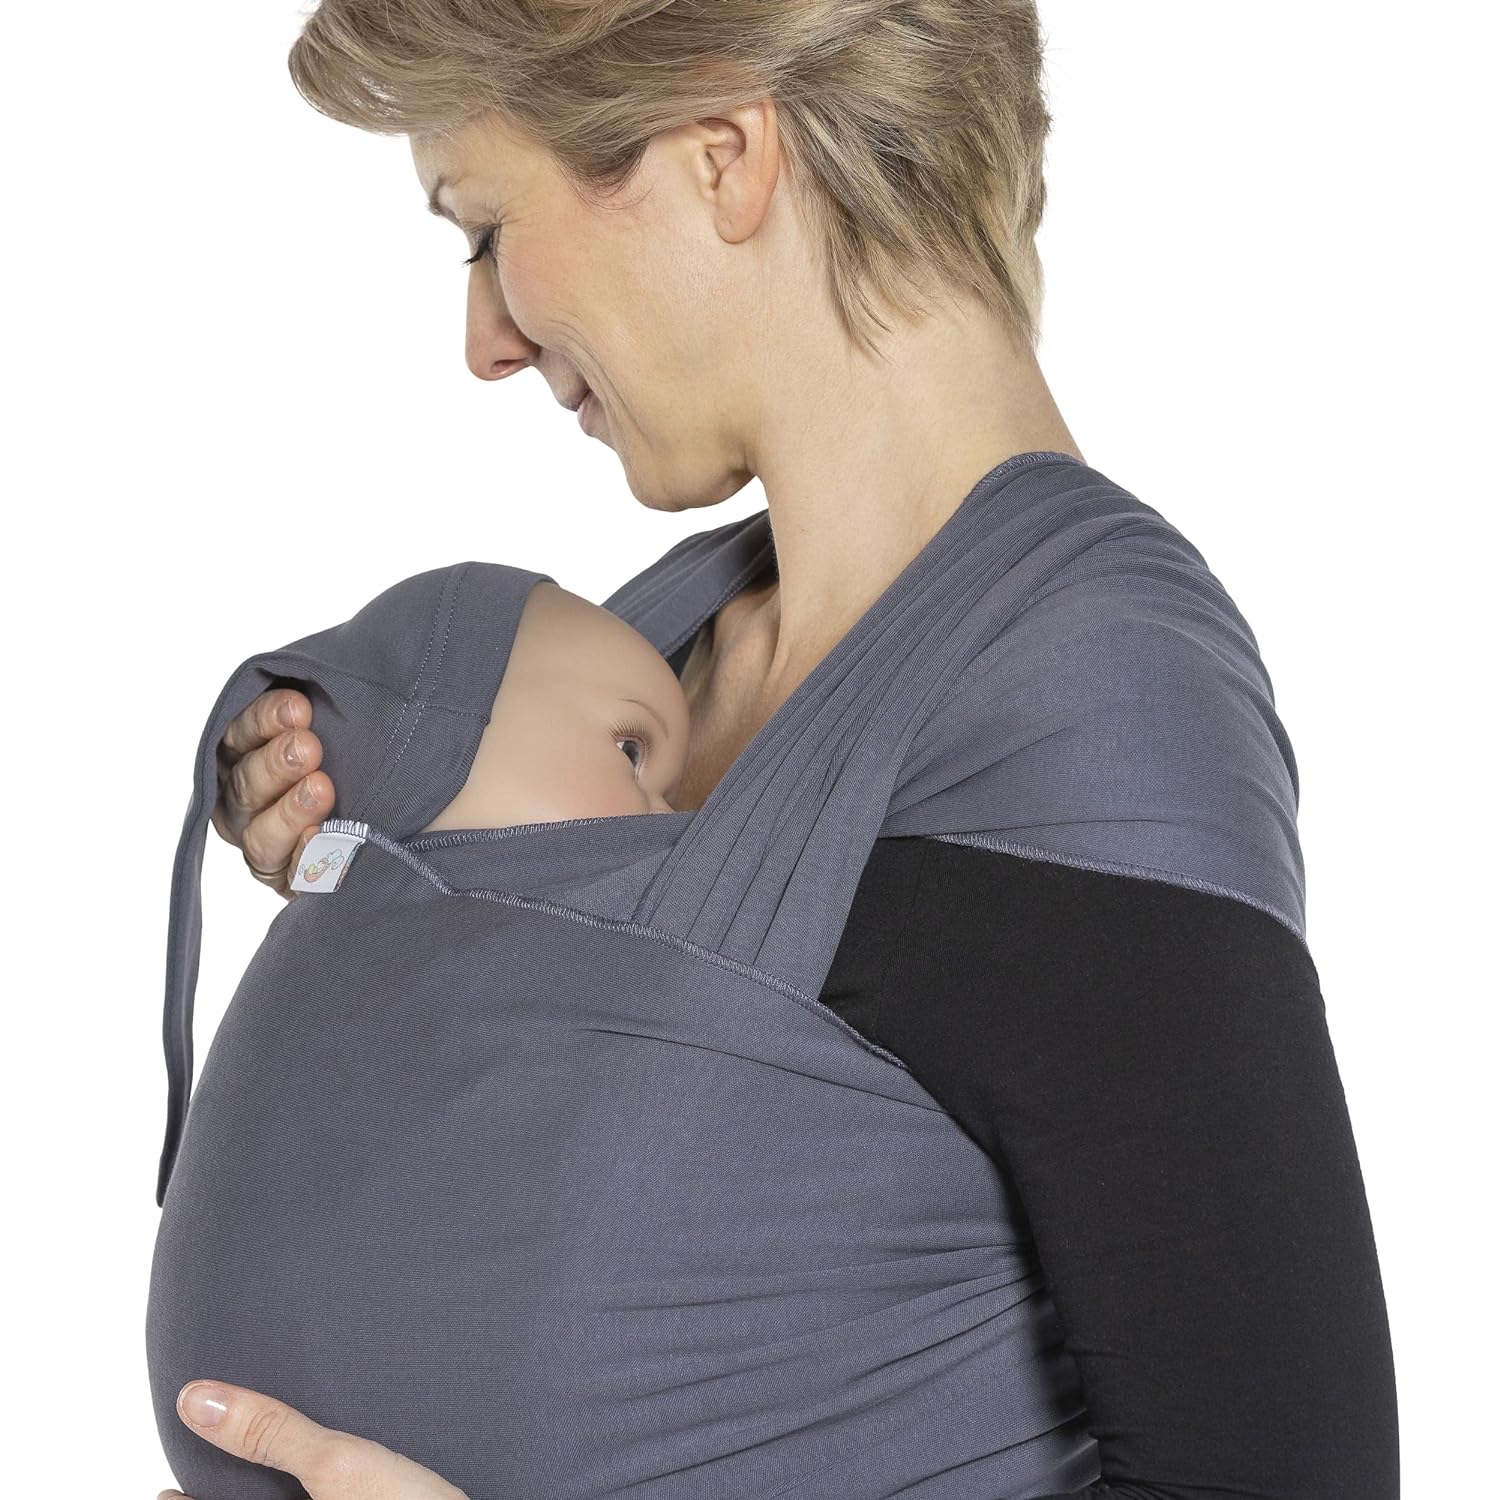 Schmusewolke Flexi First Scarf - Baby Sling for Newborns and Babies - Made of Cotton - up to 8 kg - Dark Grey